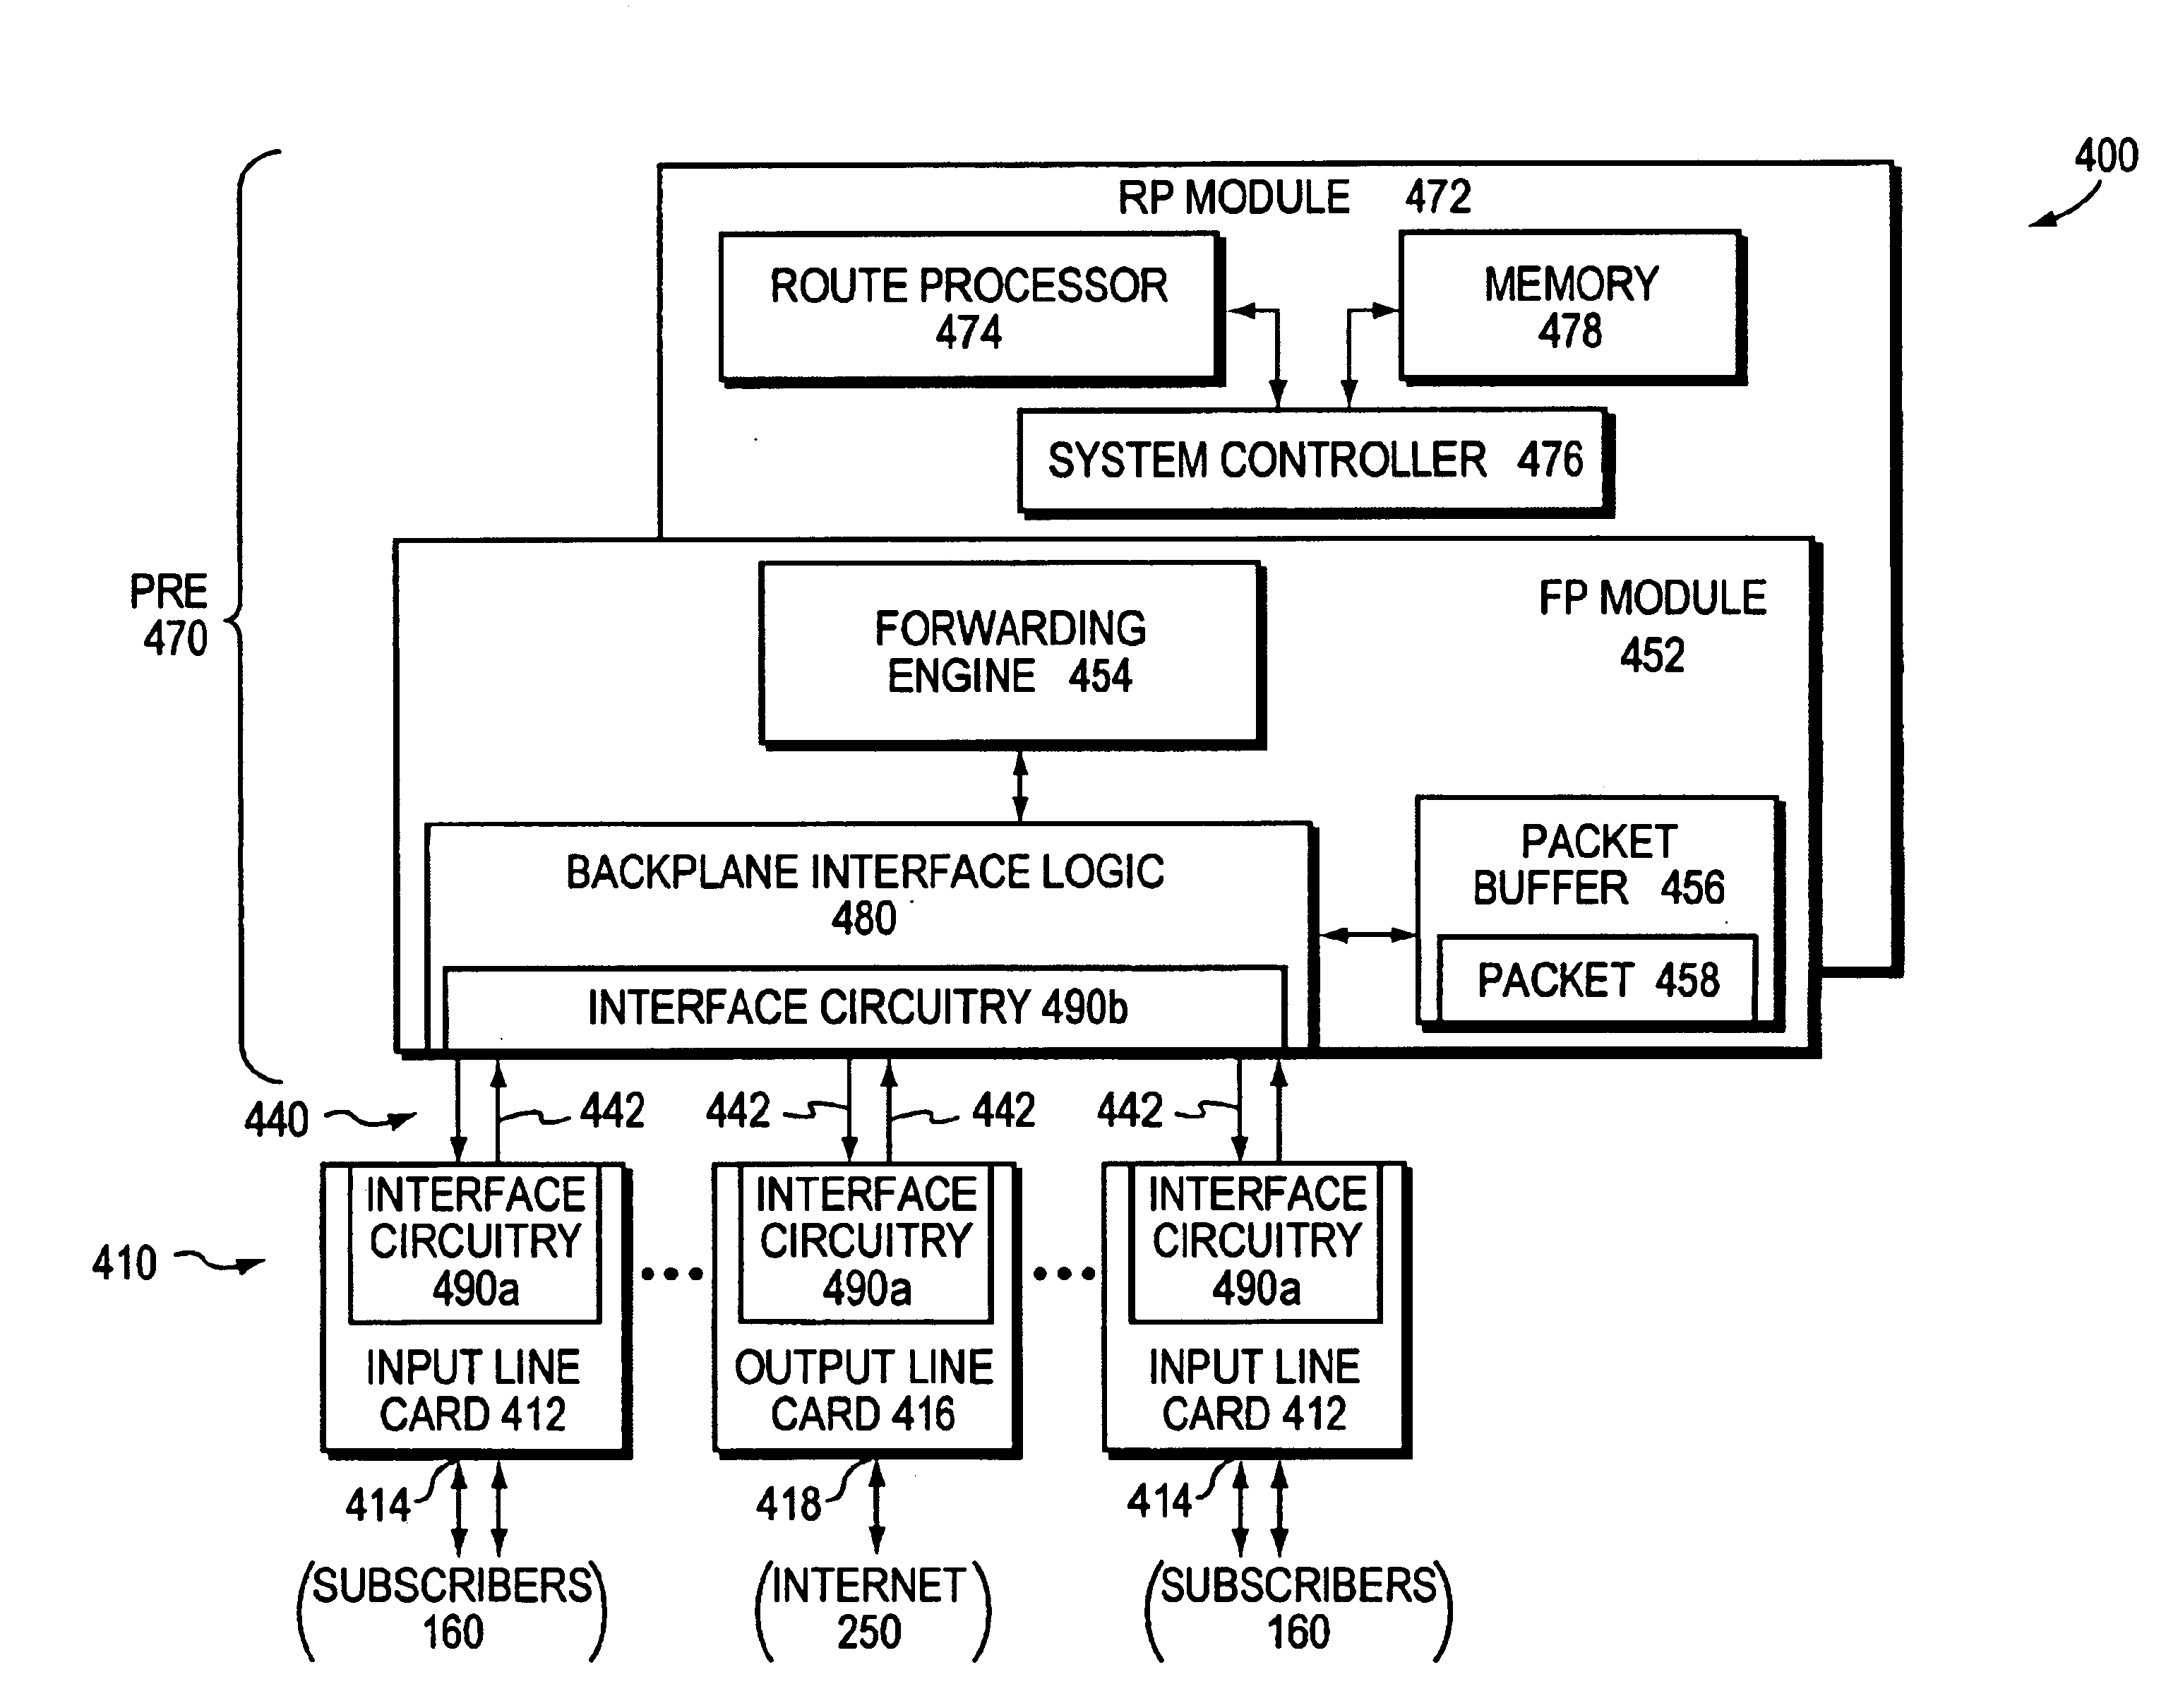 Data plane restart without state change in a control plane of an intermediate network node